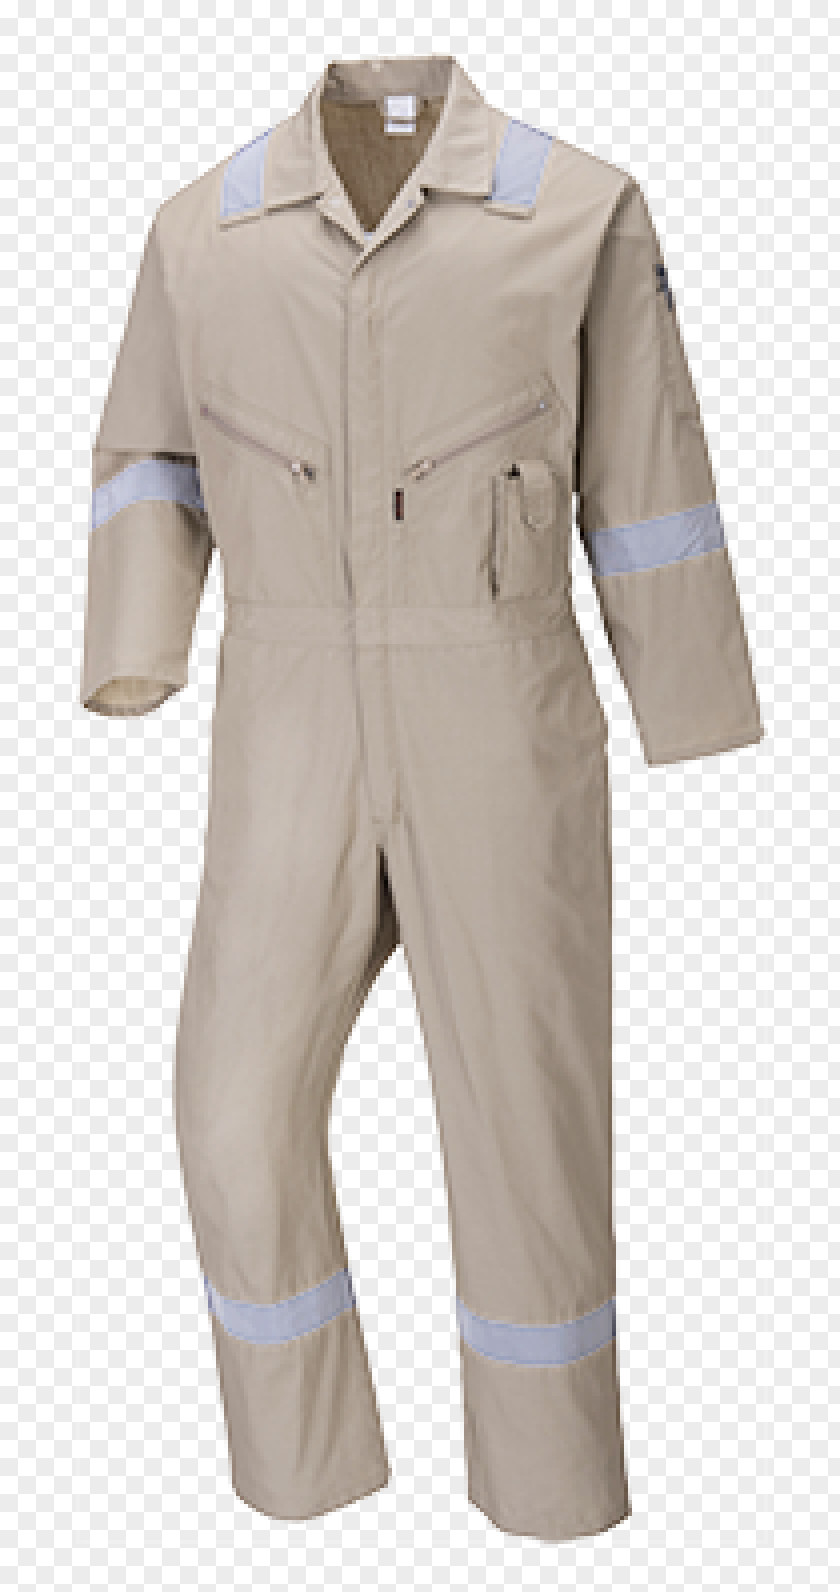 Polo Shirt Workwear Boilersuit Overall Pants Clothing PNG